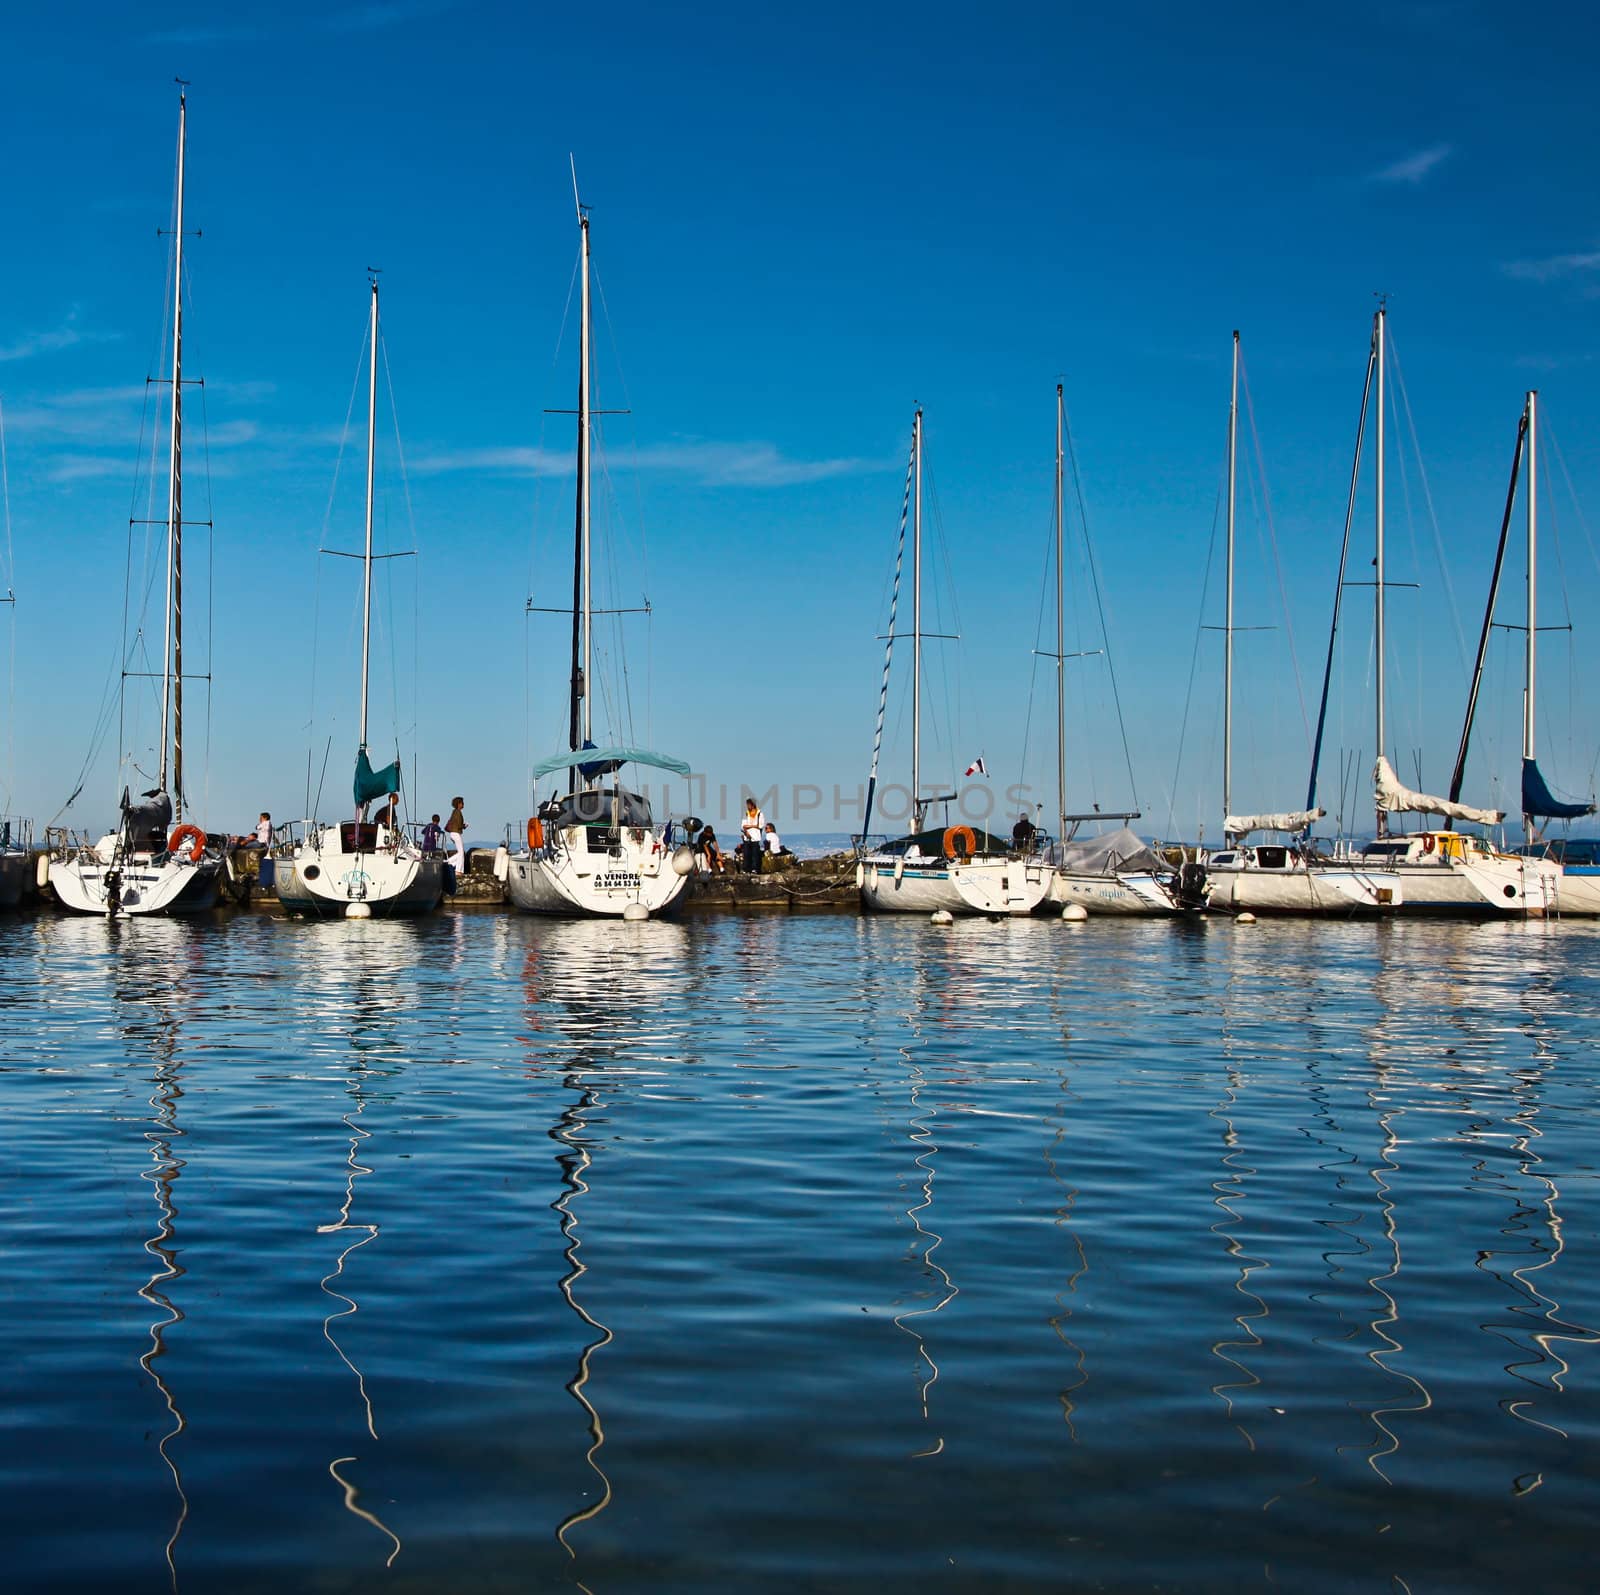 Sailboats at a marina in Yvoire, France